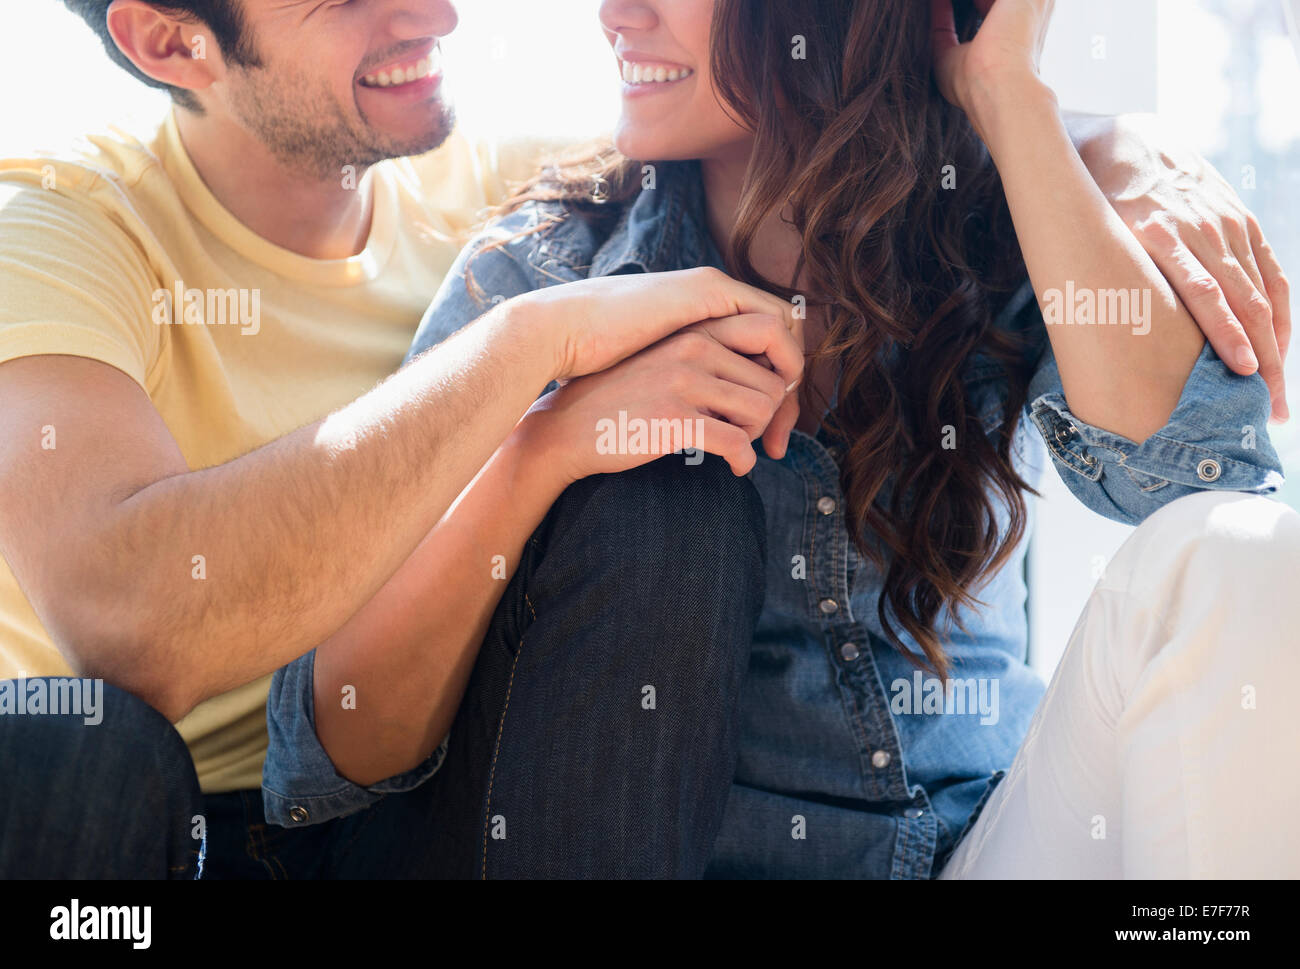 Smiling couple relaxing together Banque D'Images